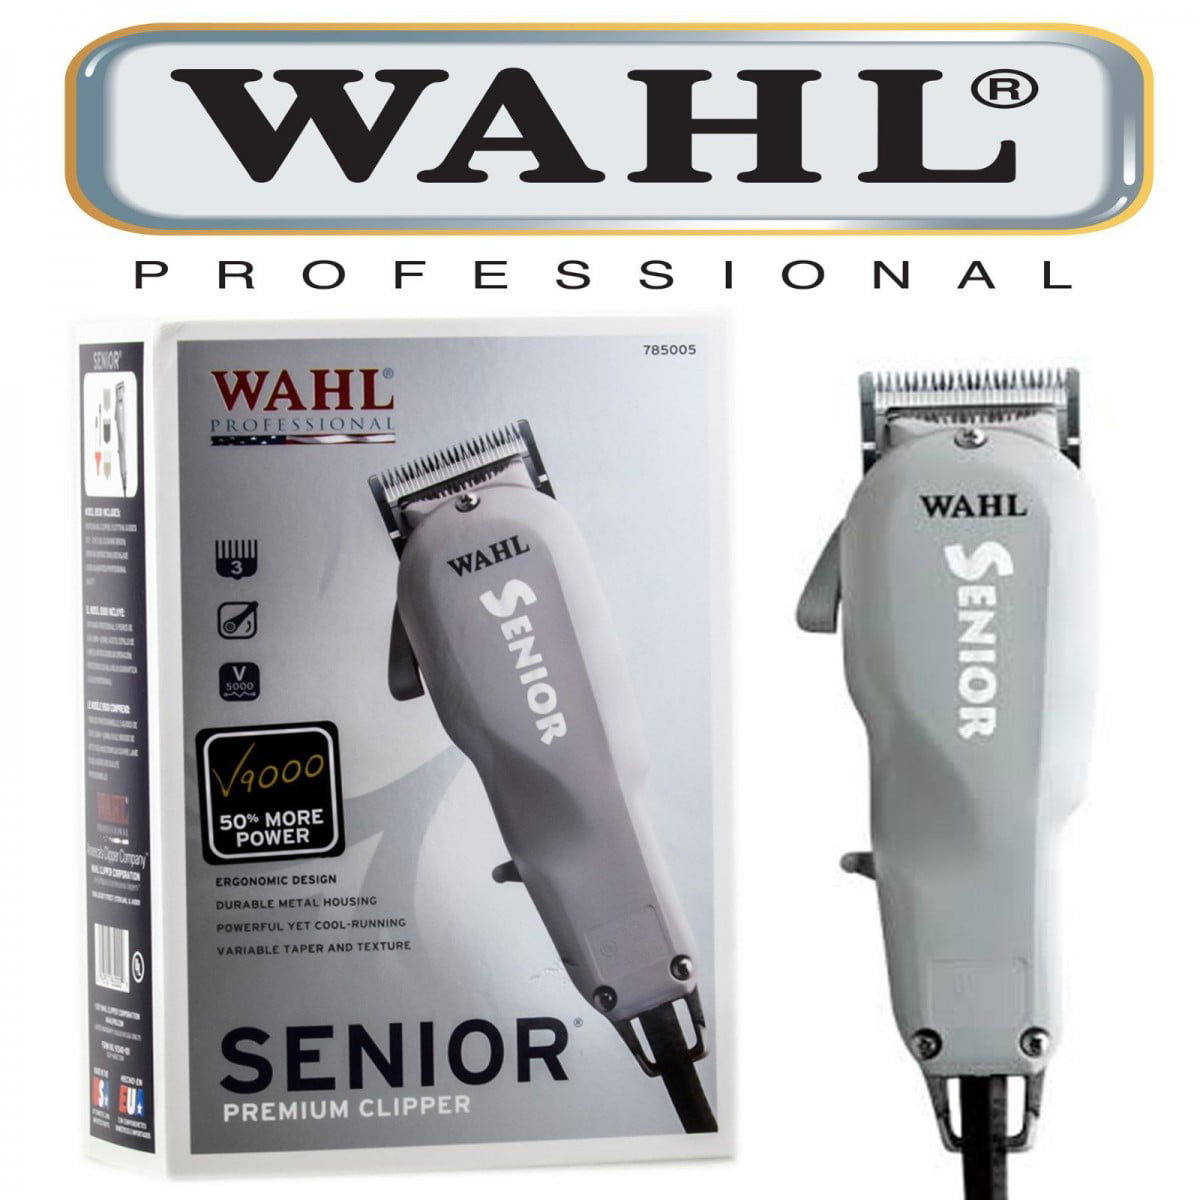 wahl senior professional hair clippers